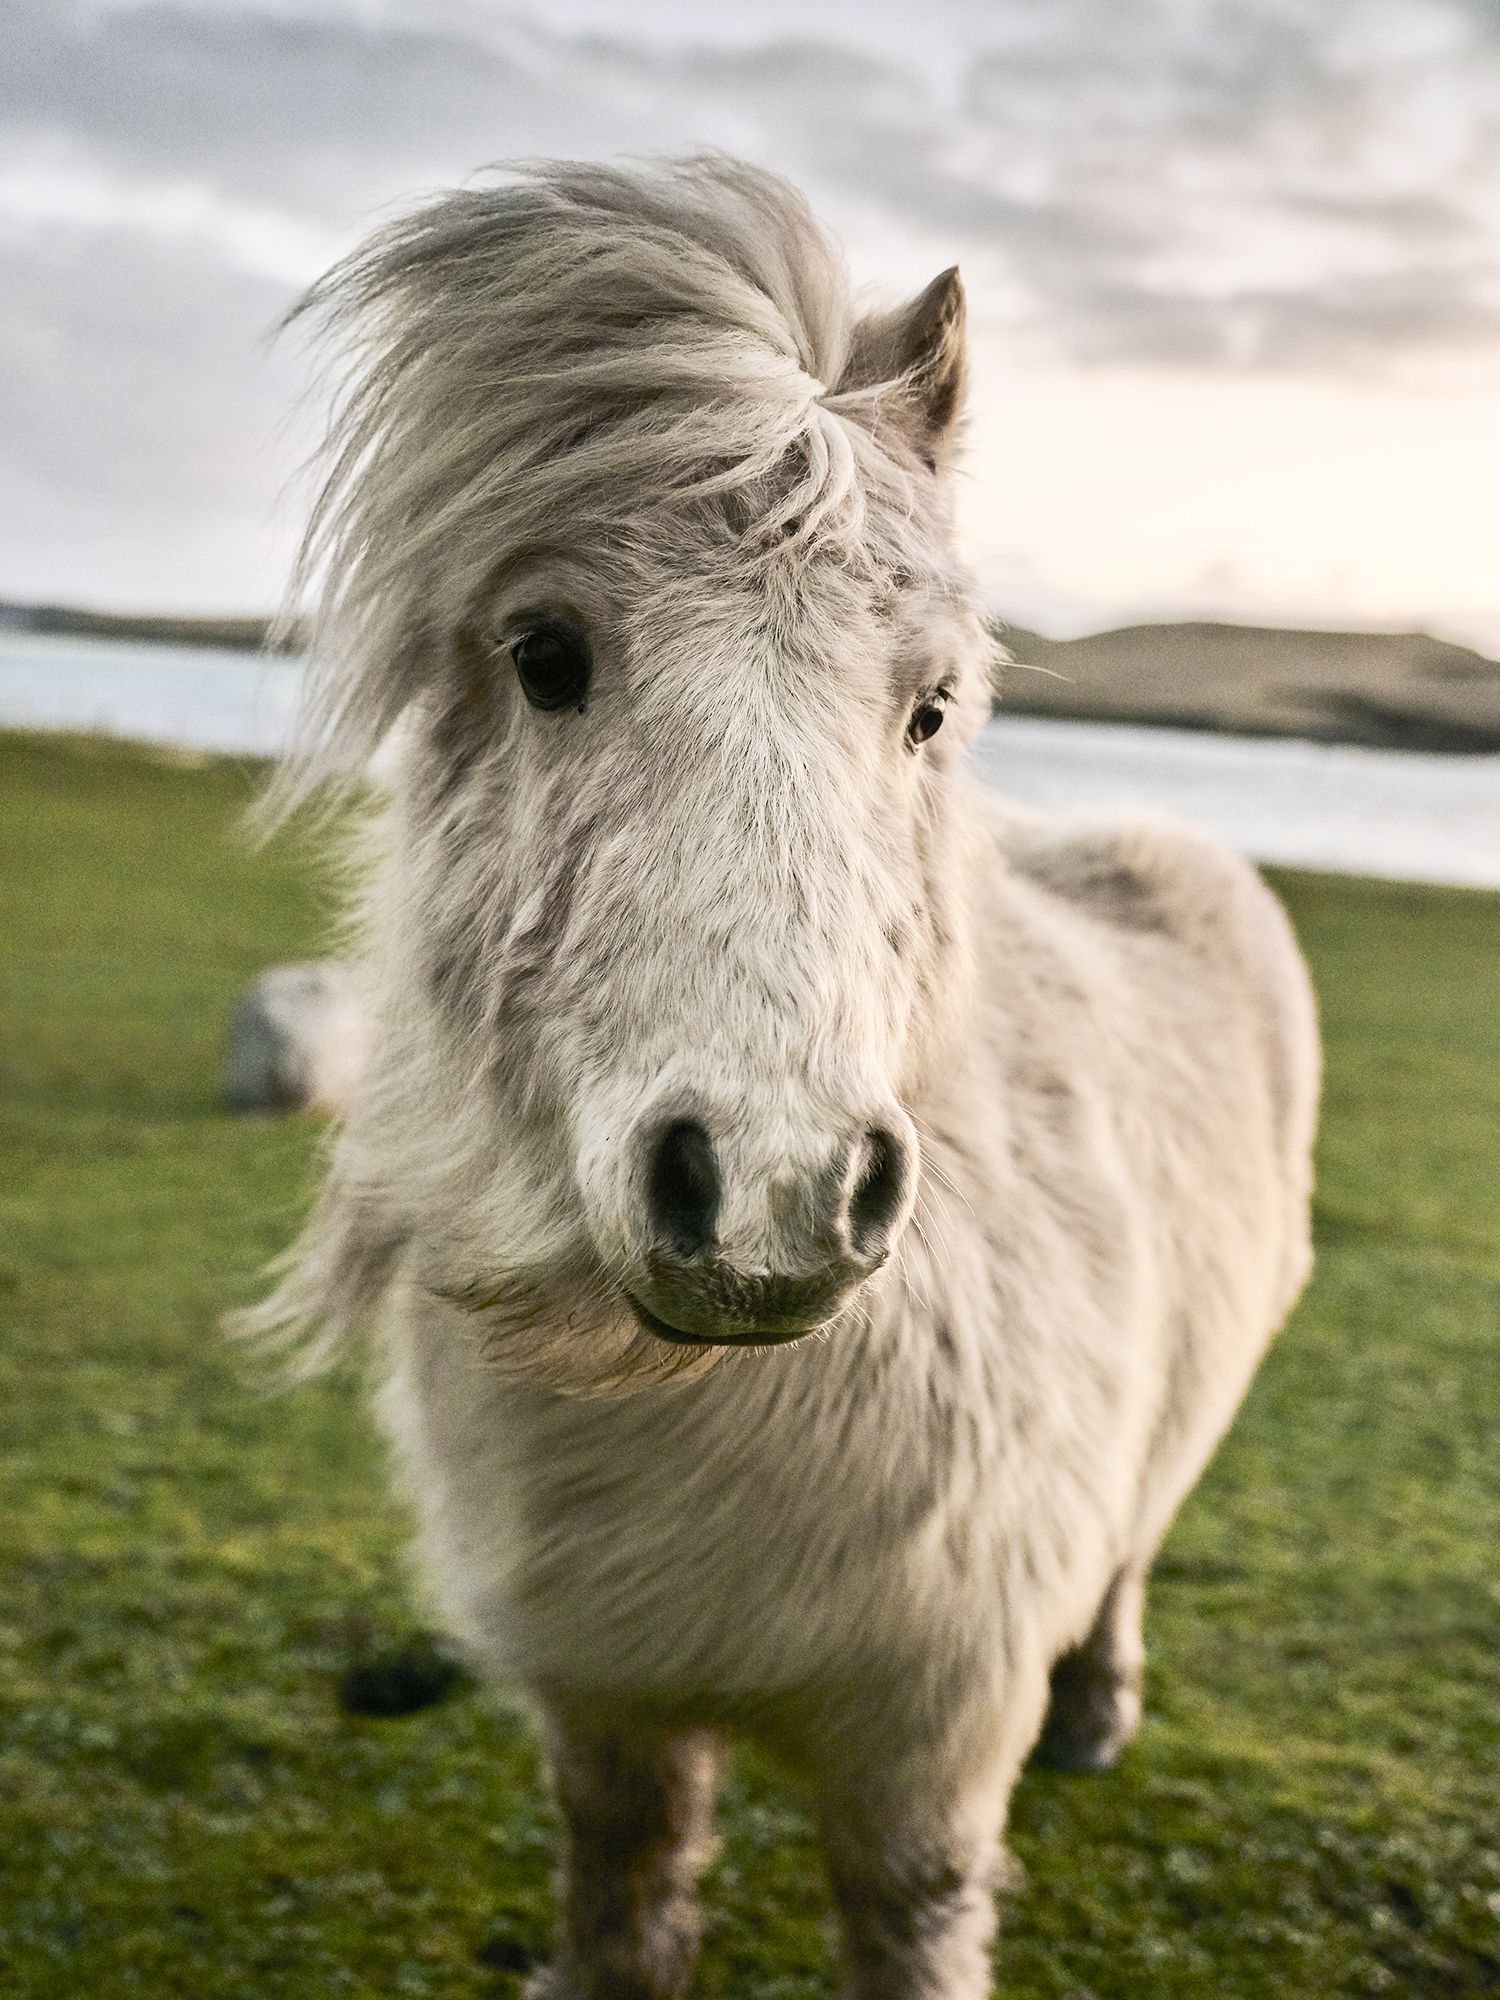 An Official Shetland Pony Must Comply With Strict Criteria